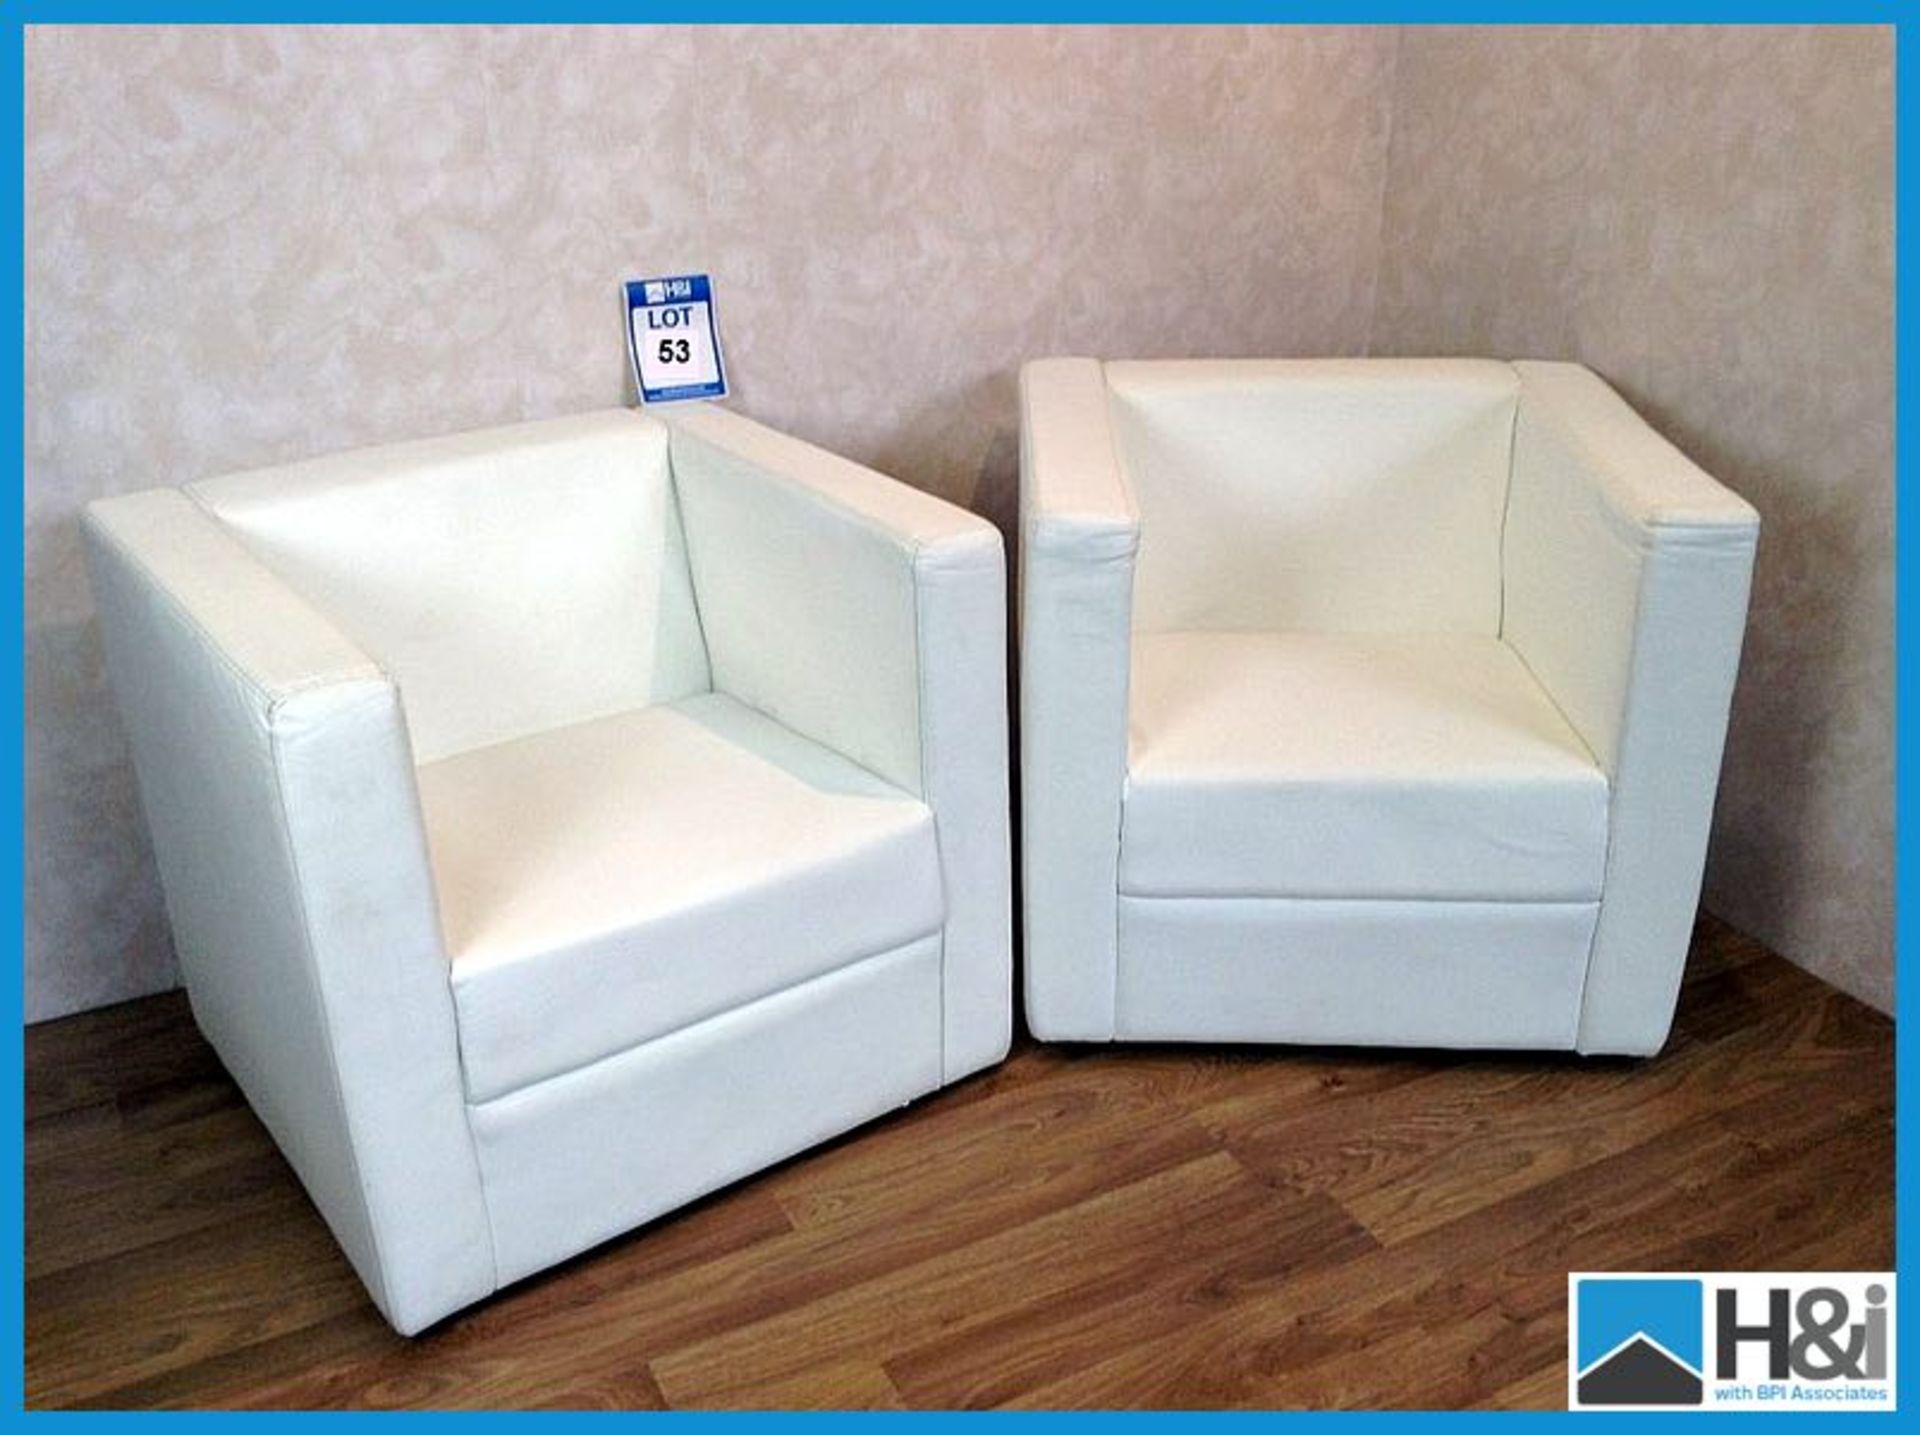 Ultra Modern White leather cube chair pair - L15 Appraisal: Good Serial No: NA Location: Identihire,